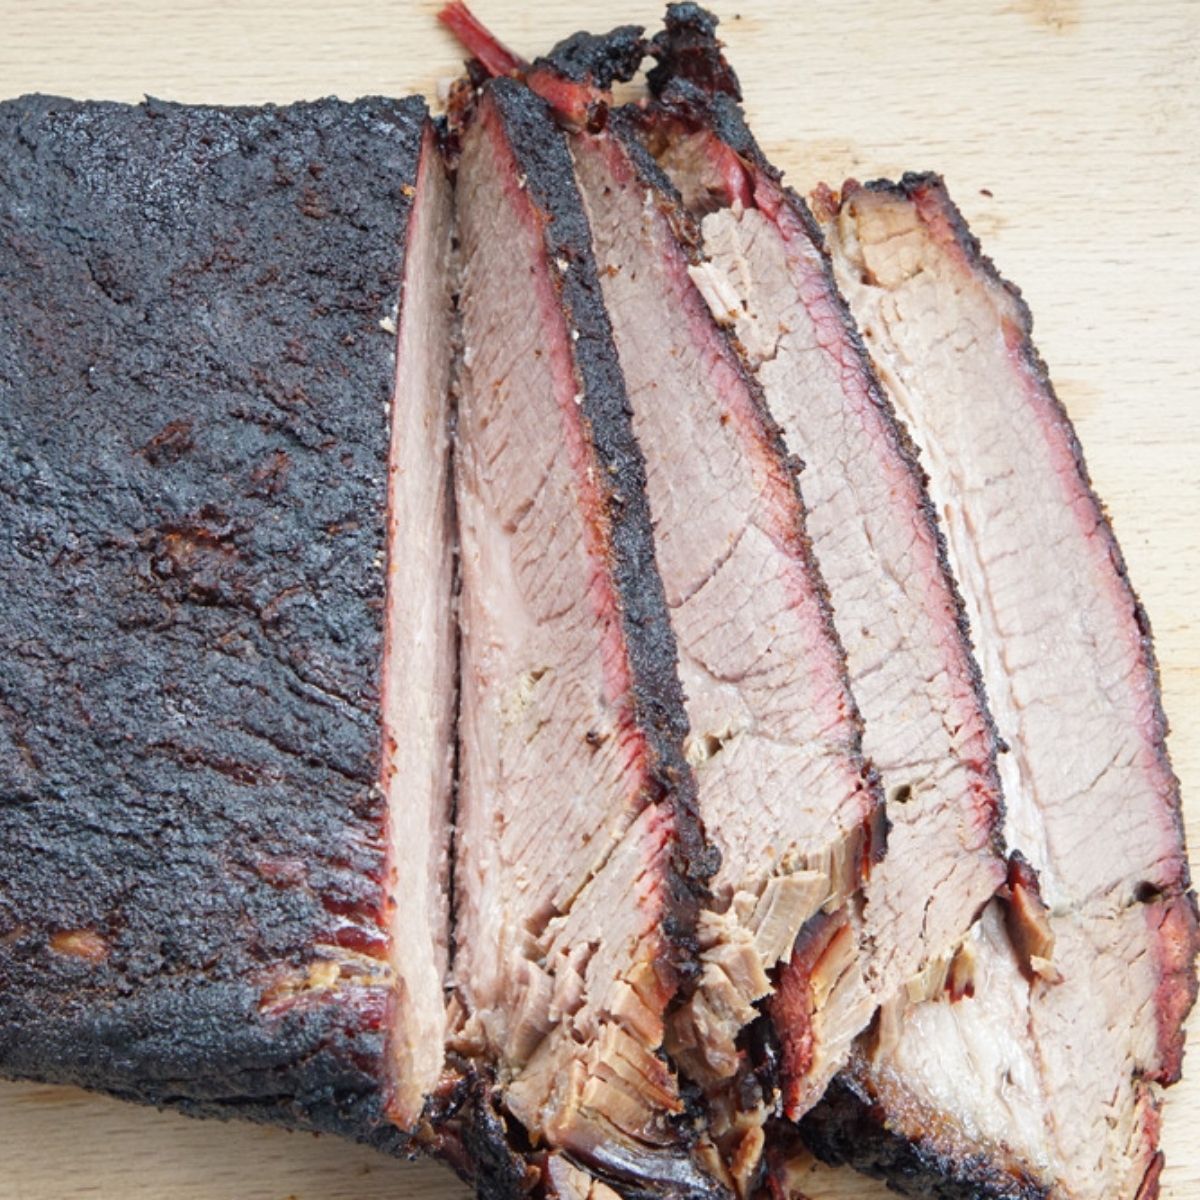 How to Make Brisket on the Traeger